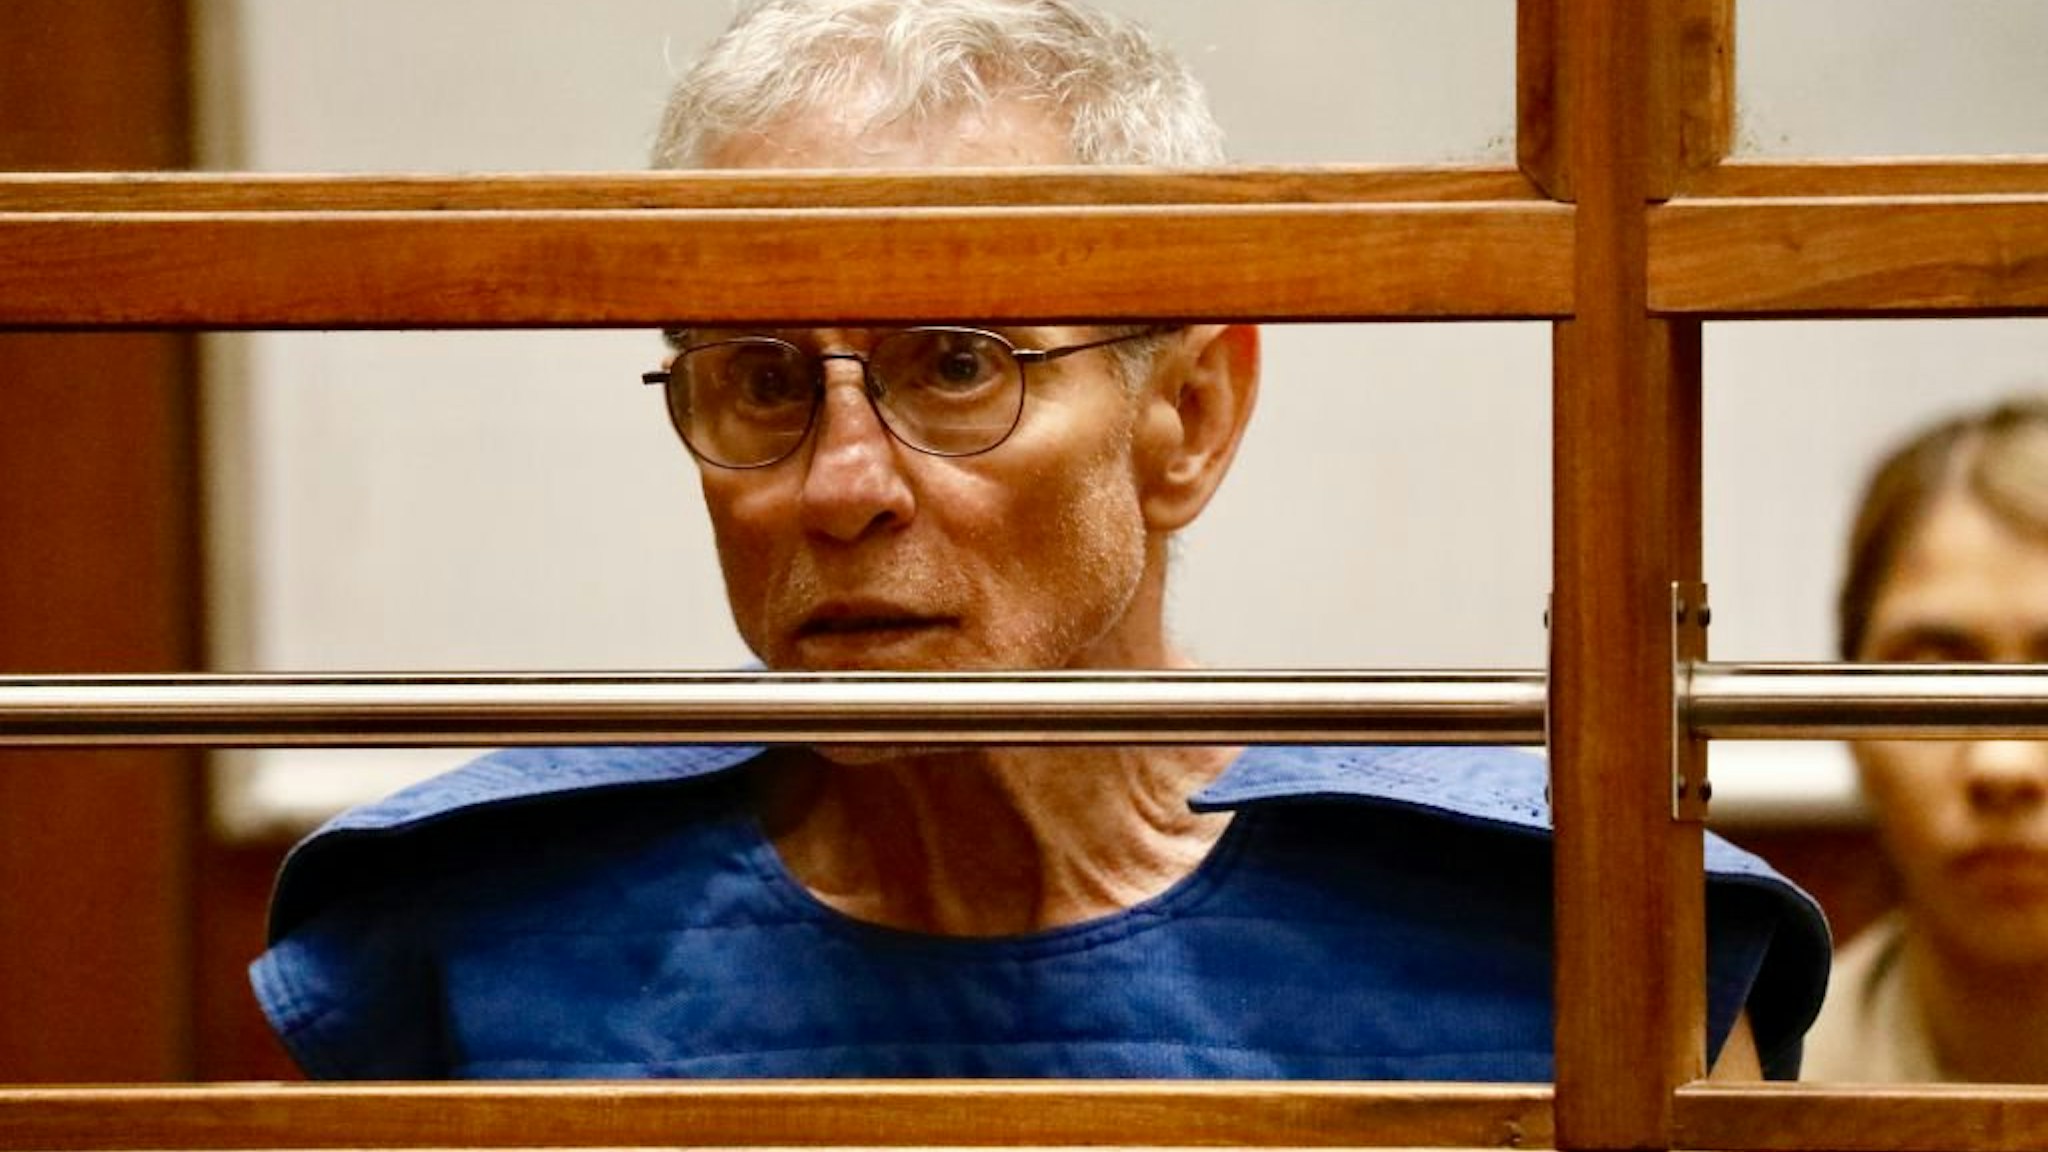 Prominent Democratic Party donor Ed Buck appears in court Thursday, September 19, 2019, on state charges of running a drug den in his West Hollywood apartment. Buck may also face federal prosecution for an earlier overdose death in the same residence.